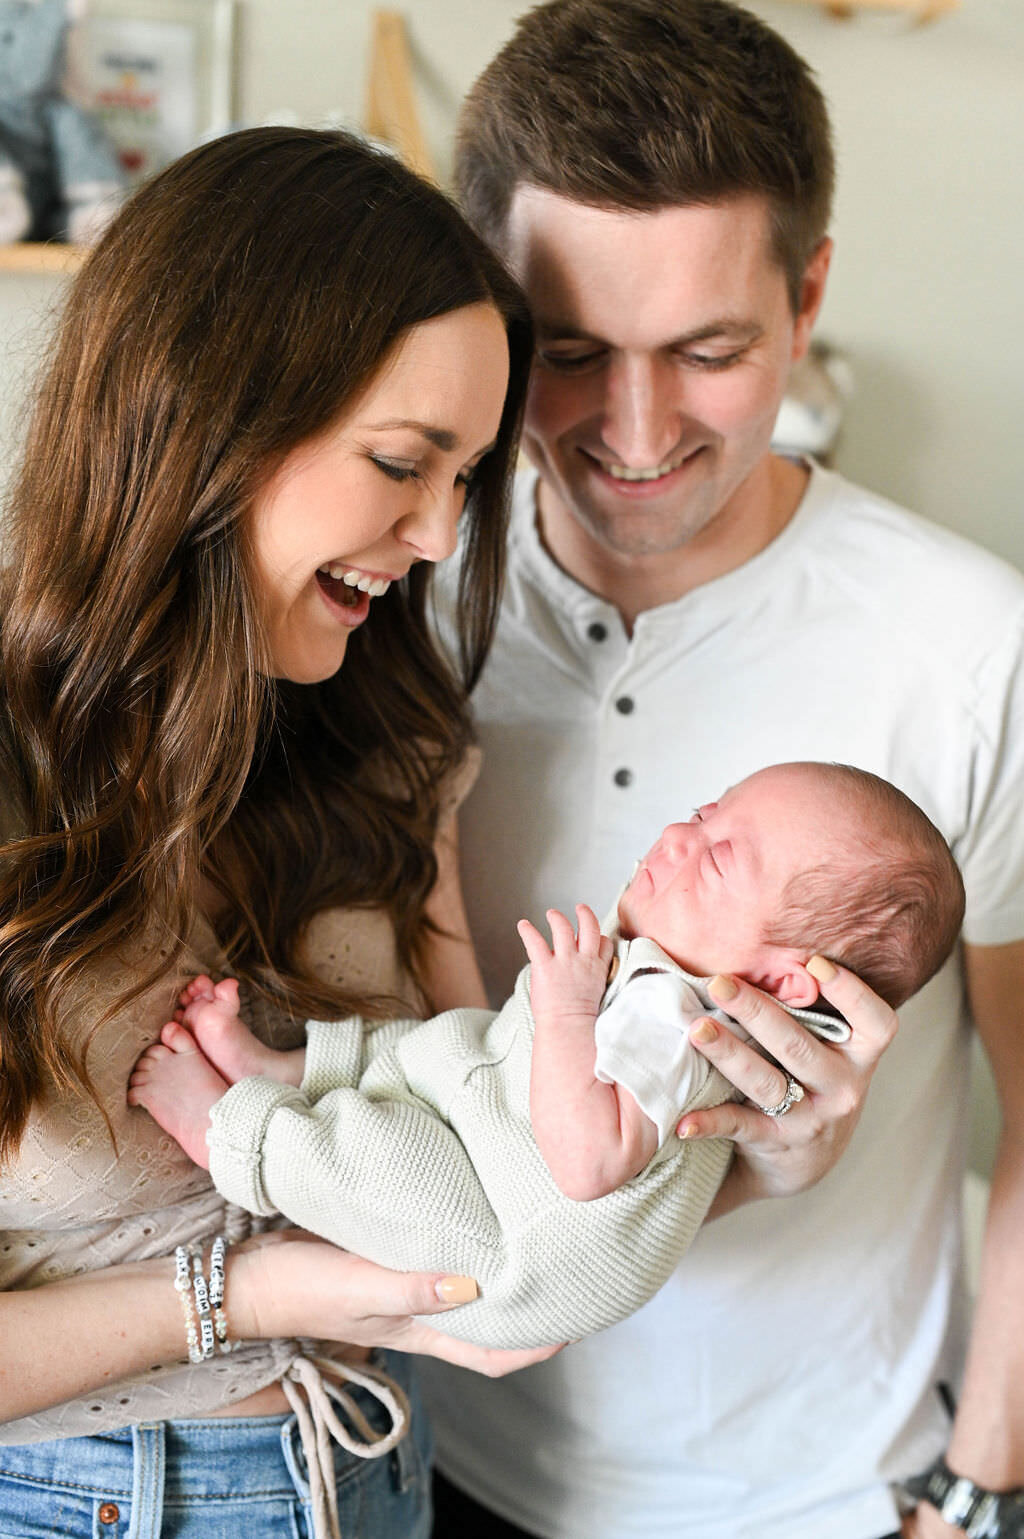 Parents holding out a newborn baby and smiling as they look down at them.